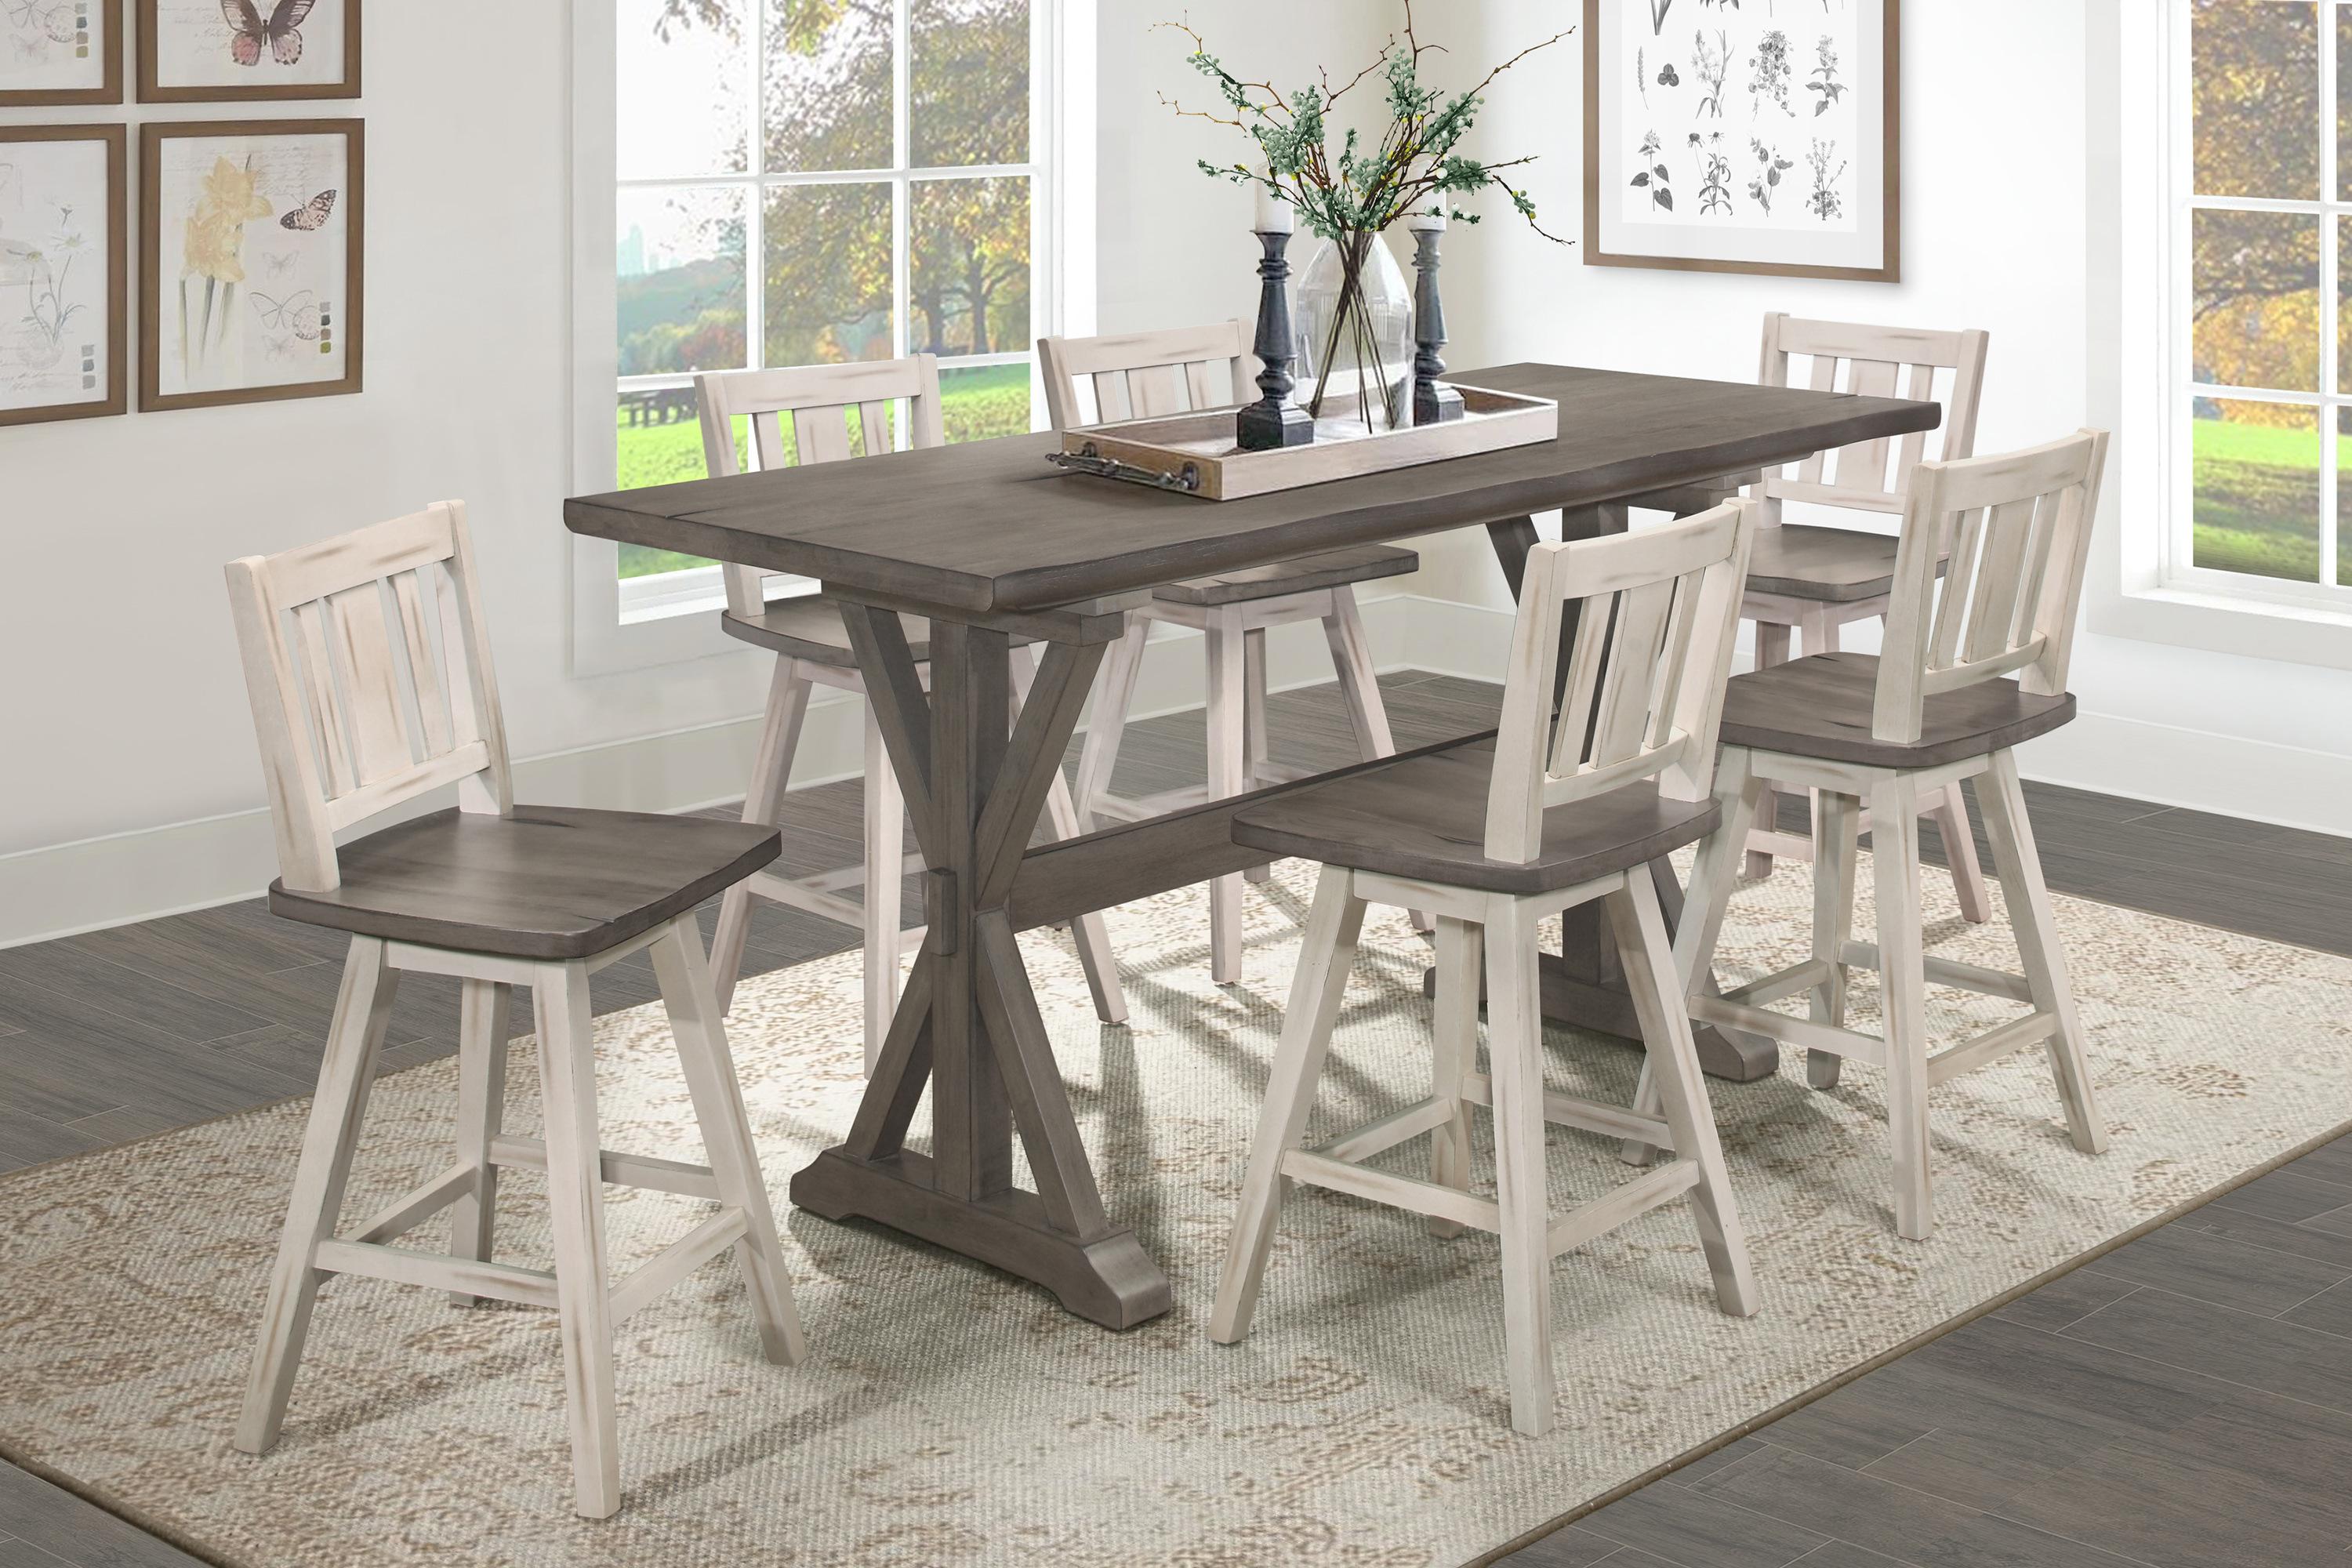 

    
Rustic Distressed Gray & White Solid Wood 24" Dining Room Set 7pcs Homelegance 5602-36-7PC Amsonia
